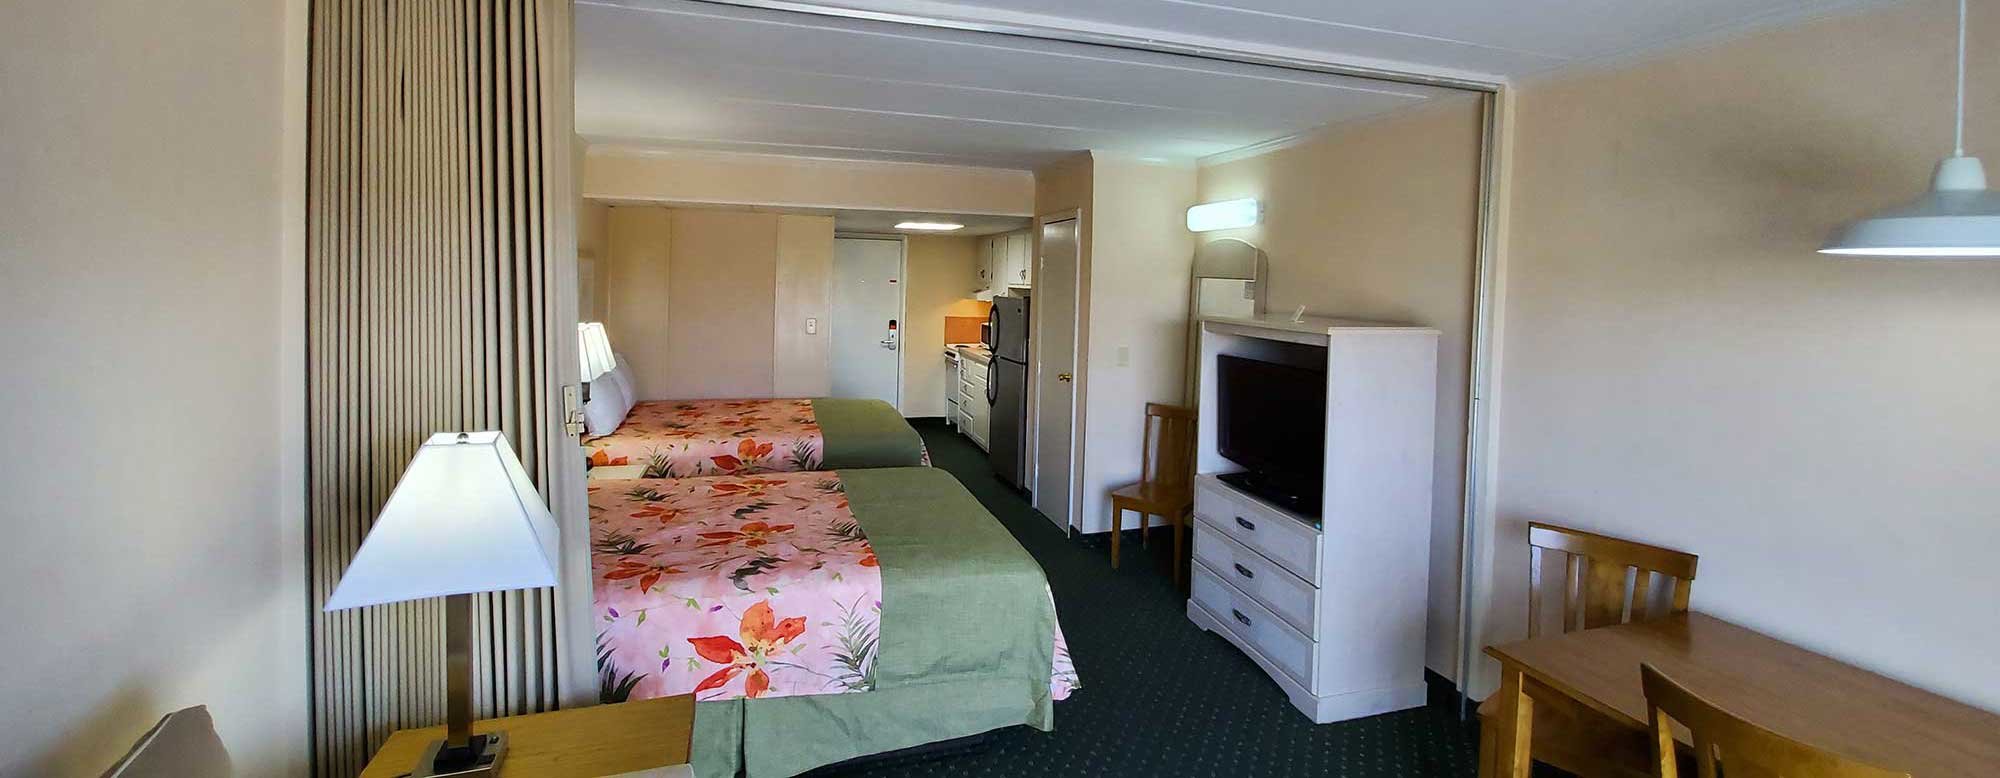 Efficiency Room at the Sea Hawk Motel with two queen beds, TV, table and kitchen